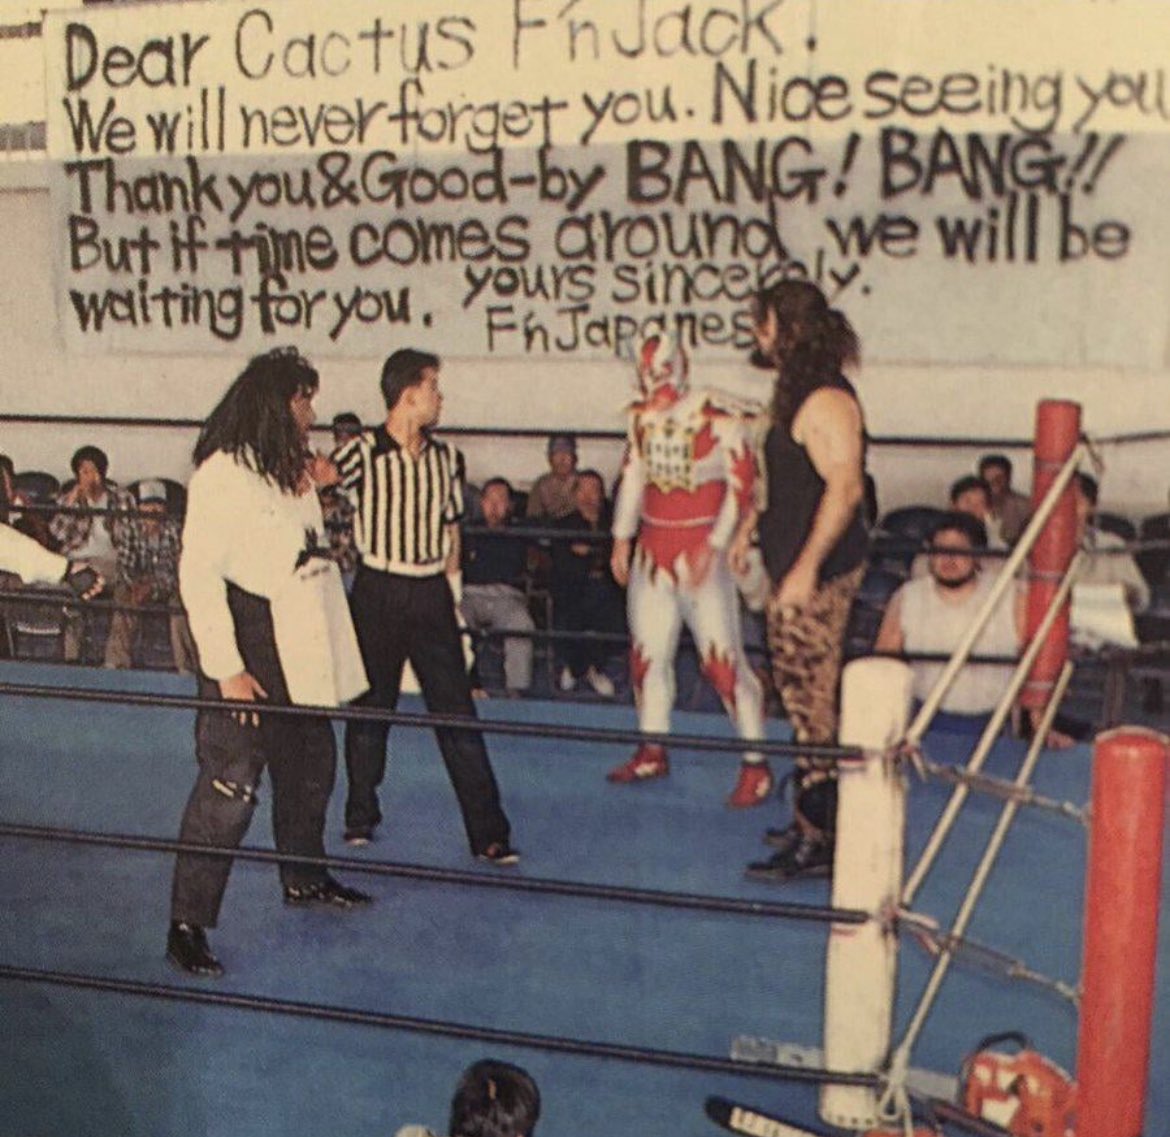 The awesome goodbye banner Japanese fans made Mick Foley before he left for the WWE in 1996.

“Yours sincerely. F’N Japanese”